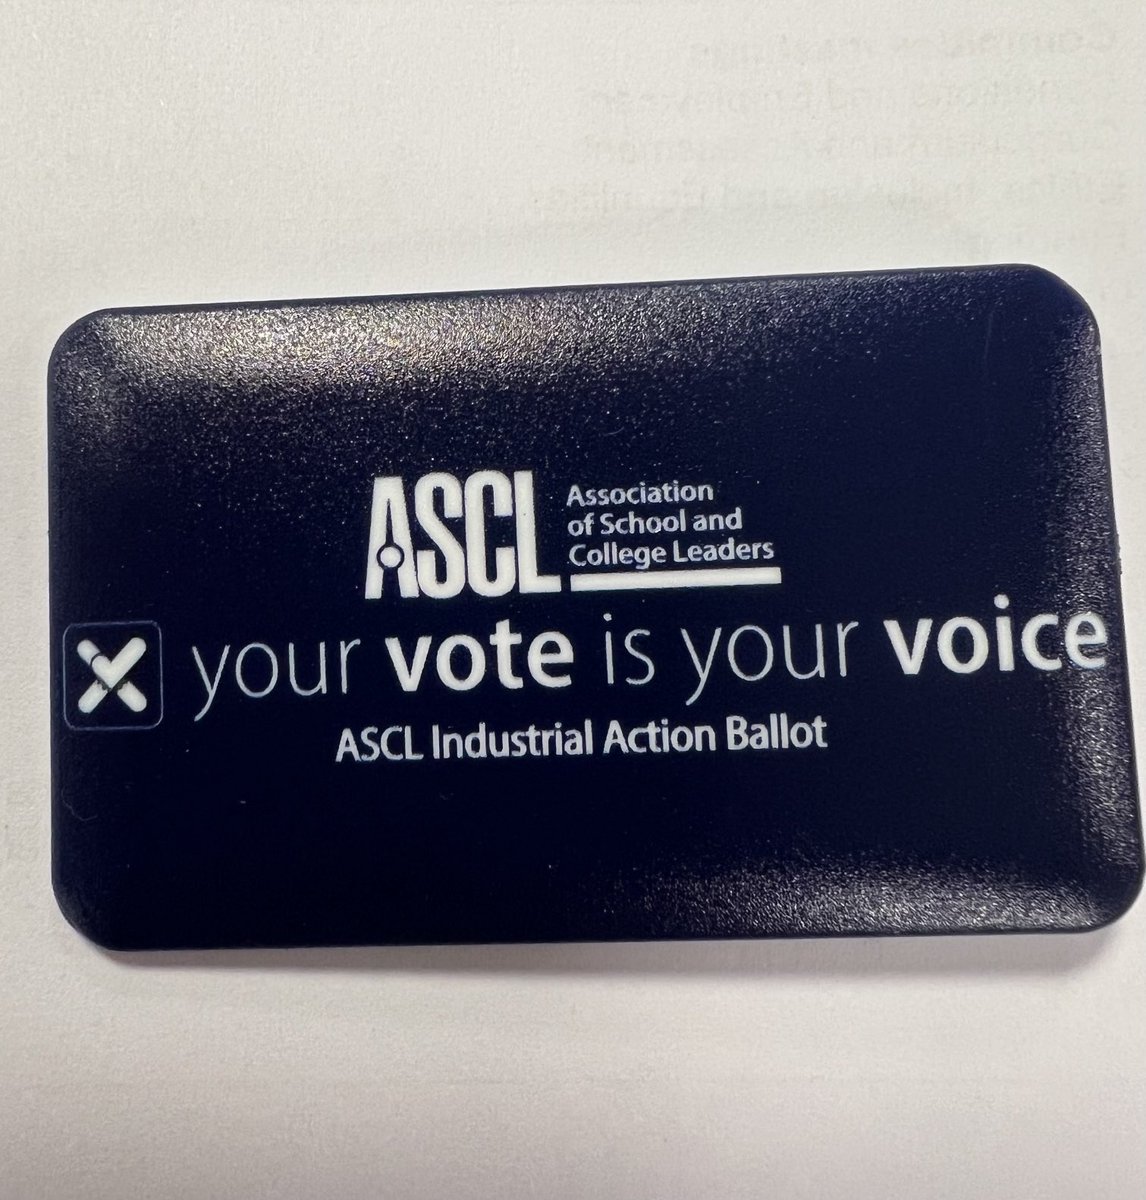 #voteforeducation. W/b 19th June, your ballot paper should arrive. YOUR VOTE IS YOUR VOICE # ascl